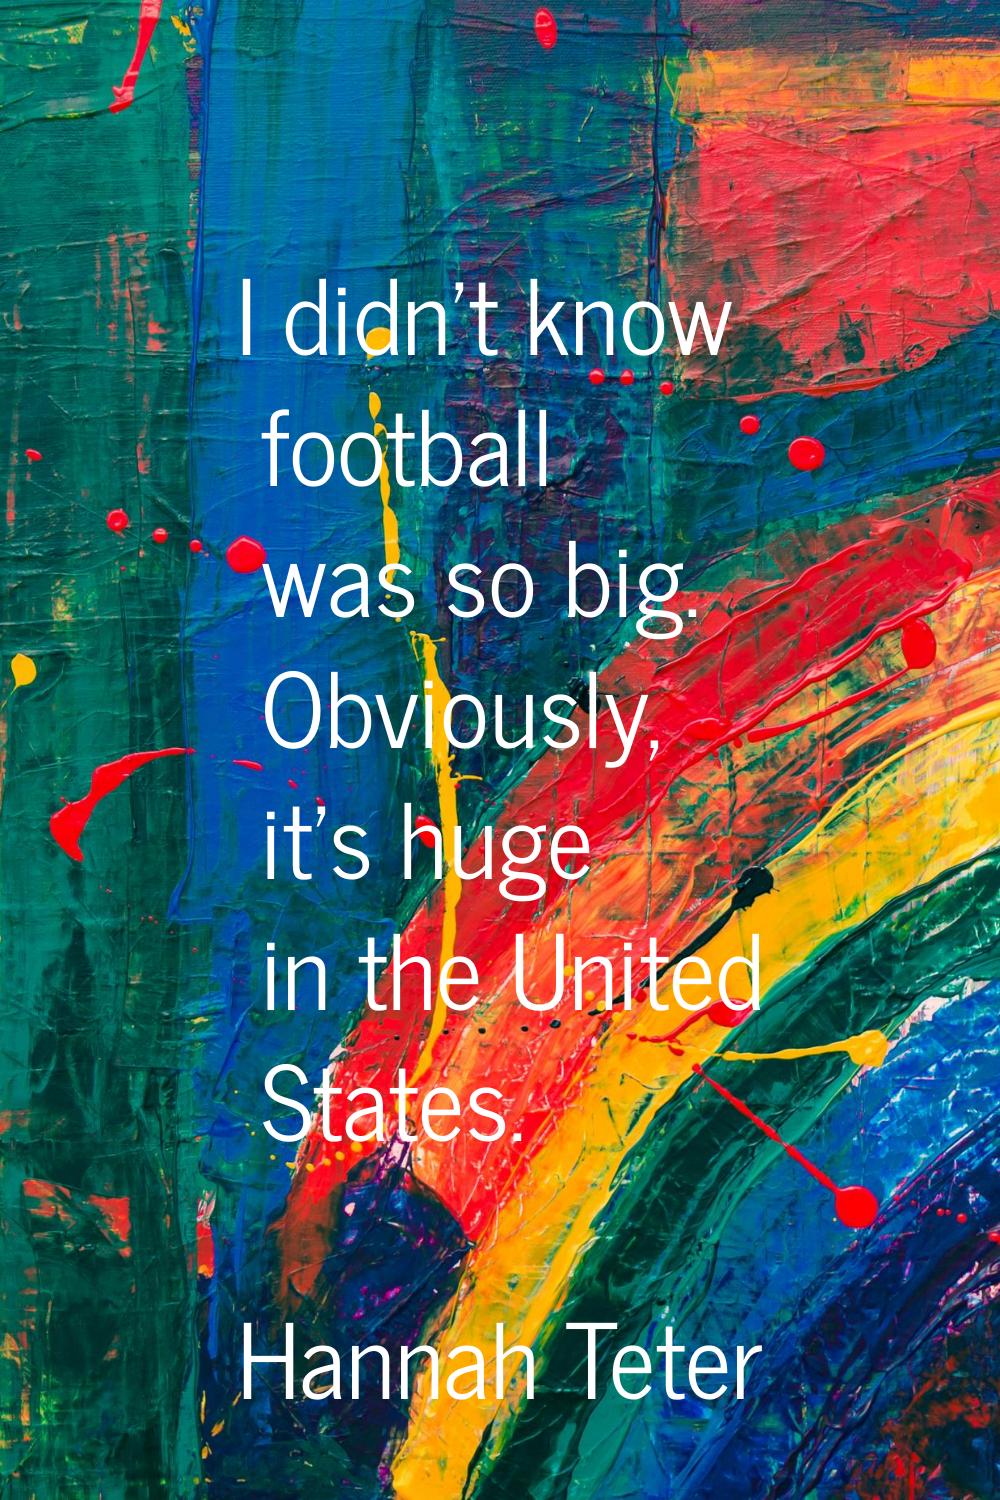 I didn't know football was so big. Obviously, it's huge in the United States.